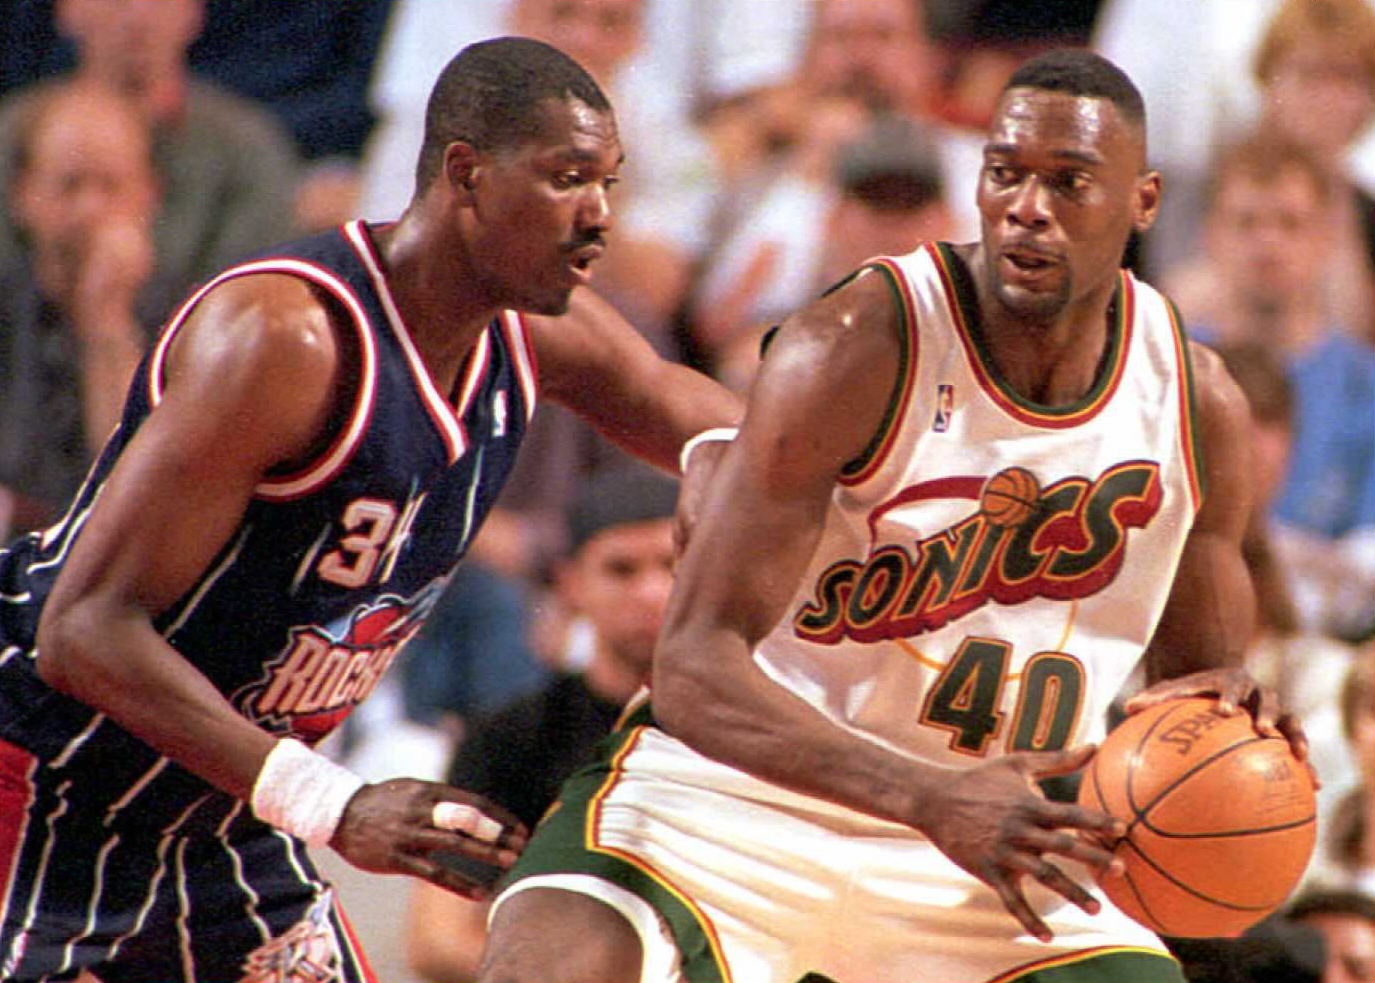 Shawn Kemp's epic finger point after monstrous dunk among the best cel...